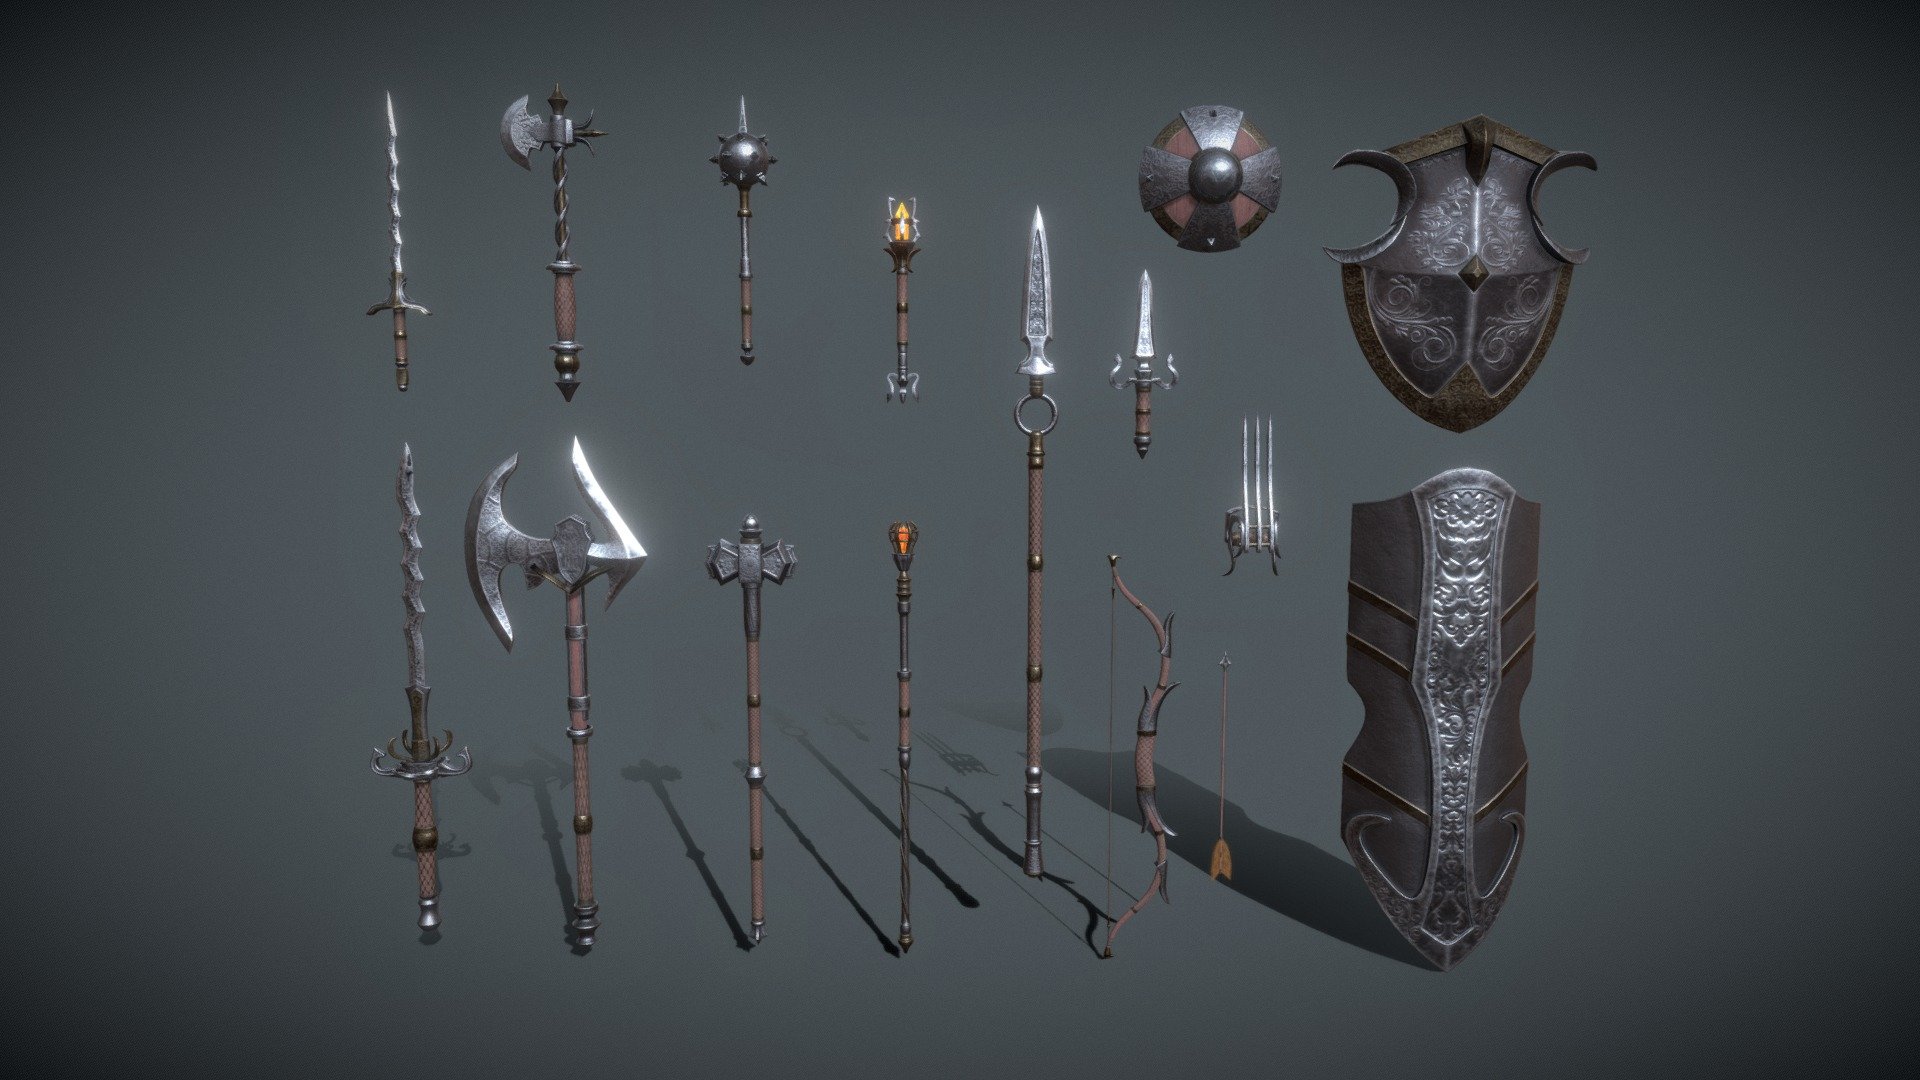 Steel Fantasy Weapon Set

A set of fantasy Steel weapons.

The set consists of sixteen unique objects.

PBR textures have a resolution of 2048x2048.

Total polygons: 48734 triangles; 24809 vertices.

1) Sword (one-handed) - 3164 tris

2) Sword (two-handed) - 5832 tris

3) Mace (one-handed) - 3152 tris

4) Mace (two-handed) - 2660 tris

5) Ax (one-handed) - 2940 tris

6) Ax (two-handed) - 3550 tris

7) Lance - 2920 tris

8) Dagger - 2356 tris

9) Brass knuckles - 2784 tris

10) Bow - 4000 tris

11) Staff - 4248 tris

12) Scepter - 3090 tris

13) Shield (small) - 1848 tris

14) Shield (medium) - 2930 tris

15) Shield (great) - 2956 tris

16) Arrow - 504 tris

Archives with textures contain:

PNG textures for blender - base color, metallic, normal, roughness, opacity, glow

Texturing Unity (Metallic Smoothness) - AlbedoTransparency, MetallicSmoothness, Normal, Emission

Texturing Unreal Engine - BaseColor, Normal, OcclusionRoughnessMetallic, Emissive - Steel Weapons Fantasy Set - 3D model by zilbeerman 3d model